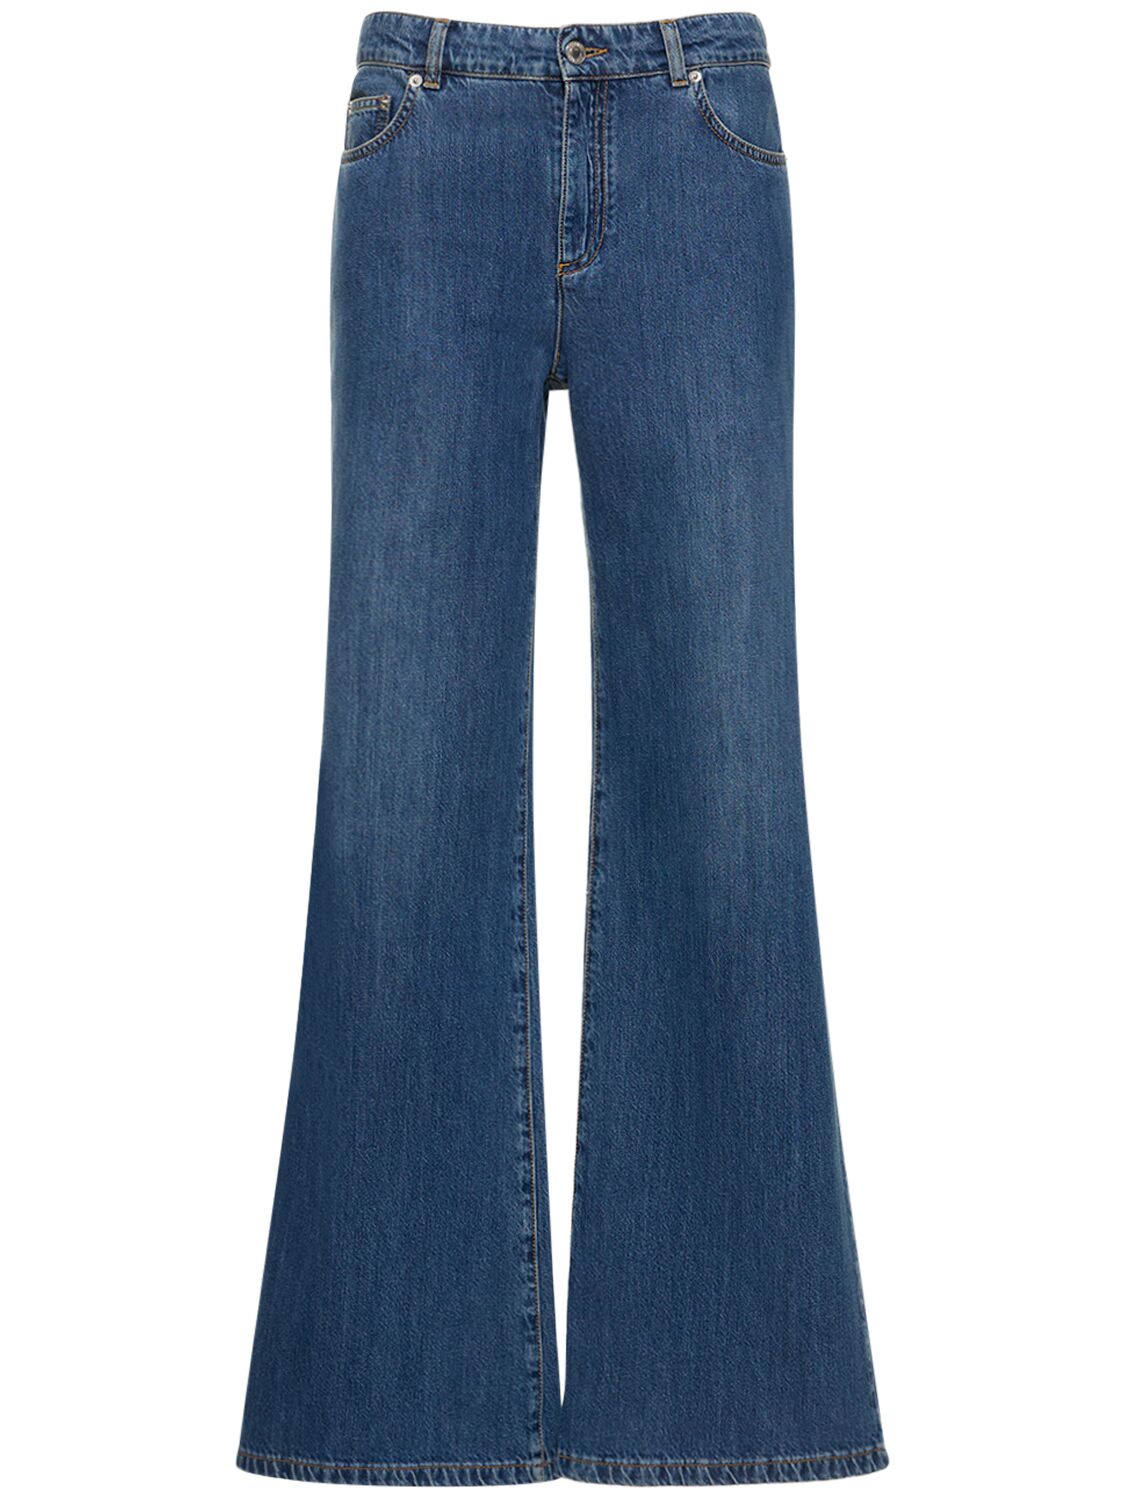 MOSCHINO DENIM COTTON LOW RISE WIDE JEANS